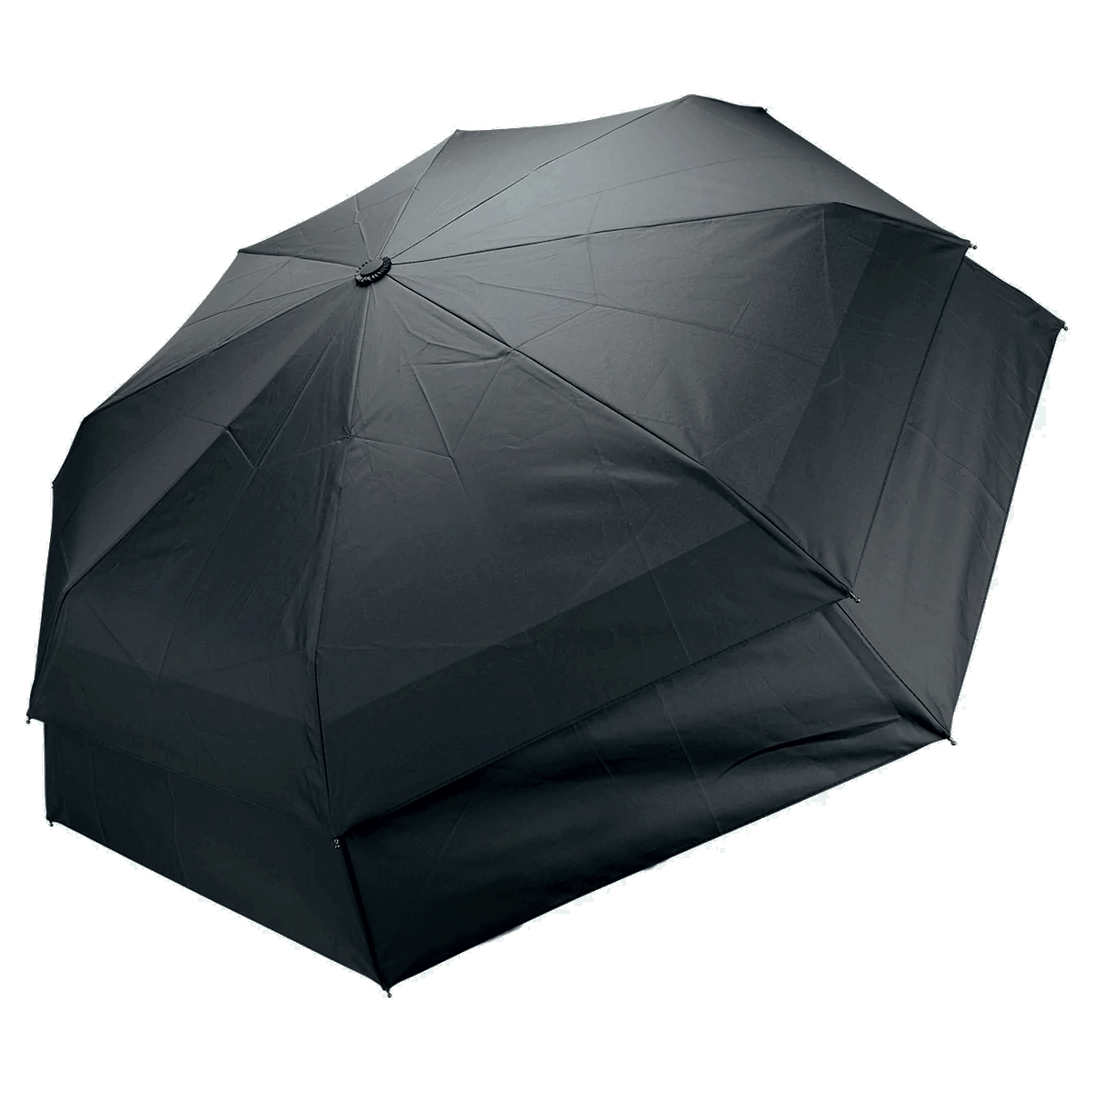 UMBRA®️ ULTIMATE COMPACT - Heavy Duty Wind-Rated Compact Umbrella With Double Layer Wind/Vent System & Superior ULTIMATE™ Fibreglass Rib Frame, Smart Auto Open & Close